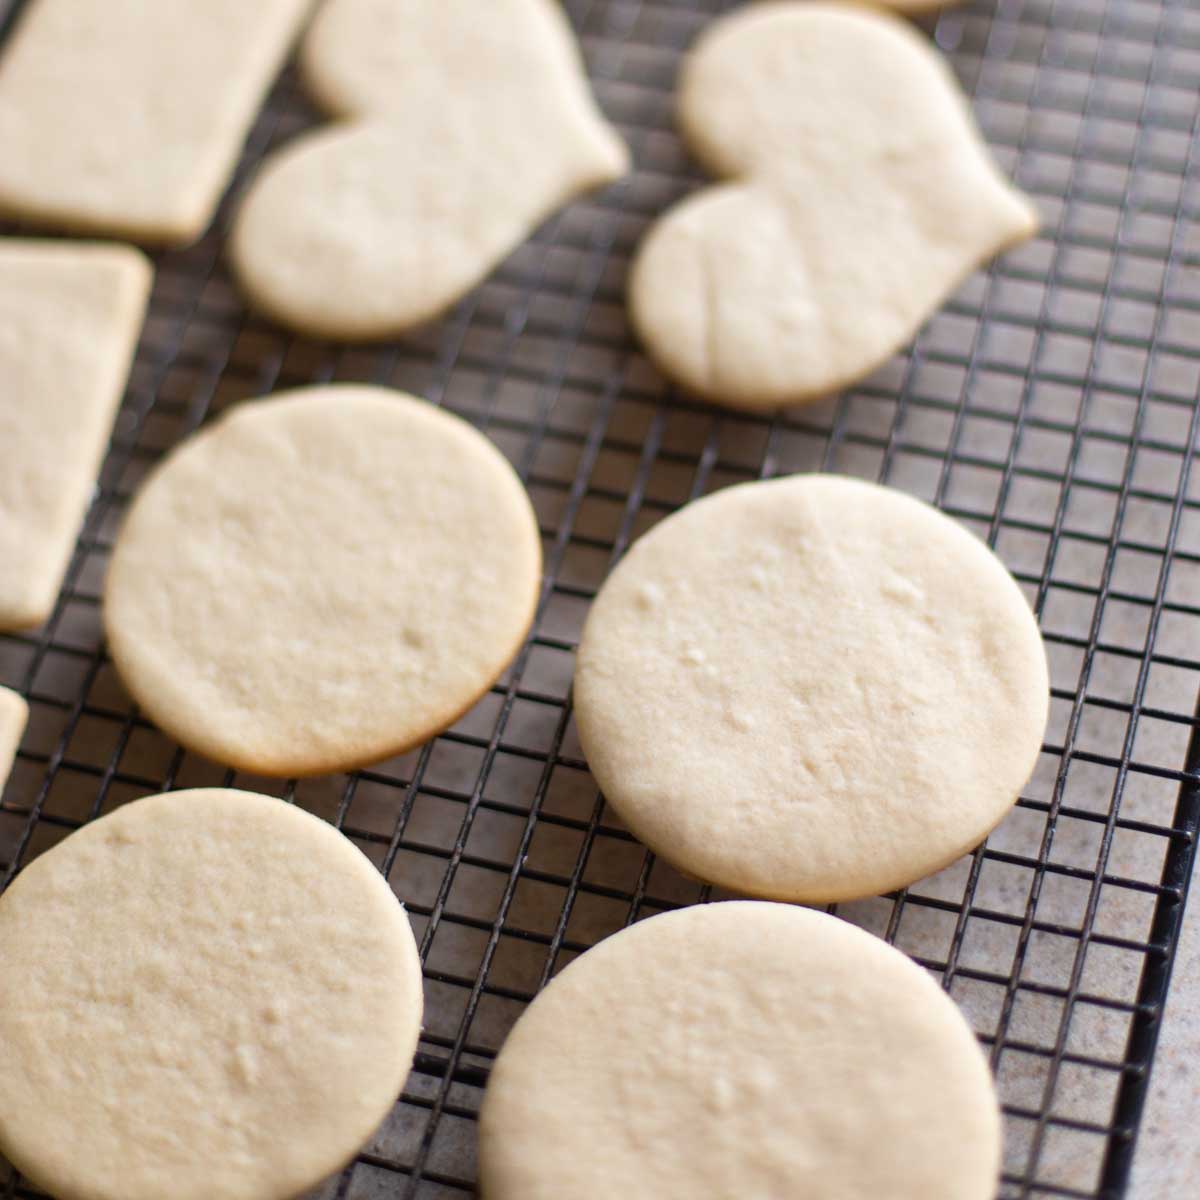 Circle and heart shaped sugar cookies are cooling on a wire rack.